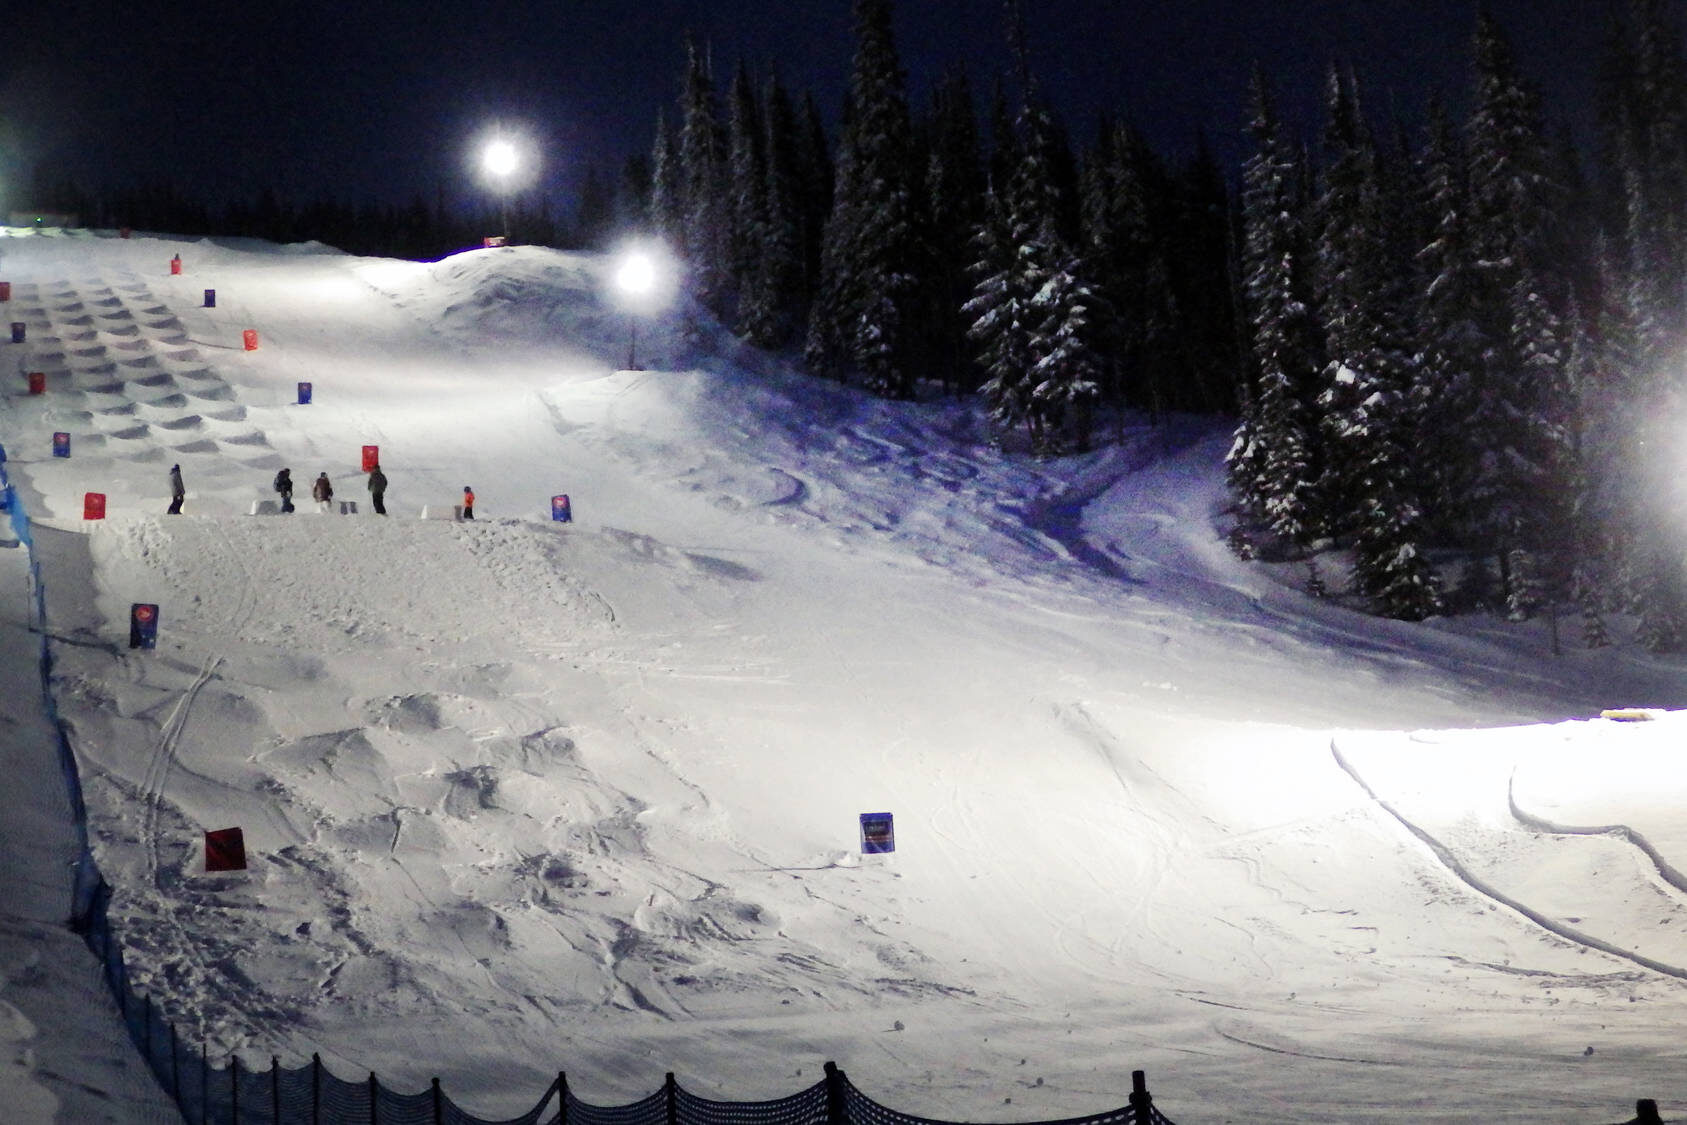 Pictured in 2018, the lighted Kristi’s Run mogul course where members of the Canadian men’s women’s Olympic teams trained before leaving for the Olympics. (Western News - File)